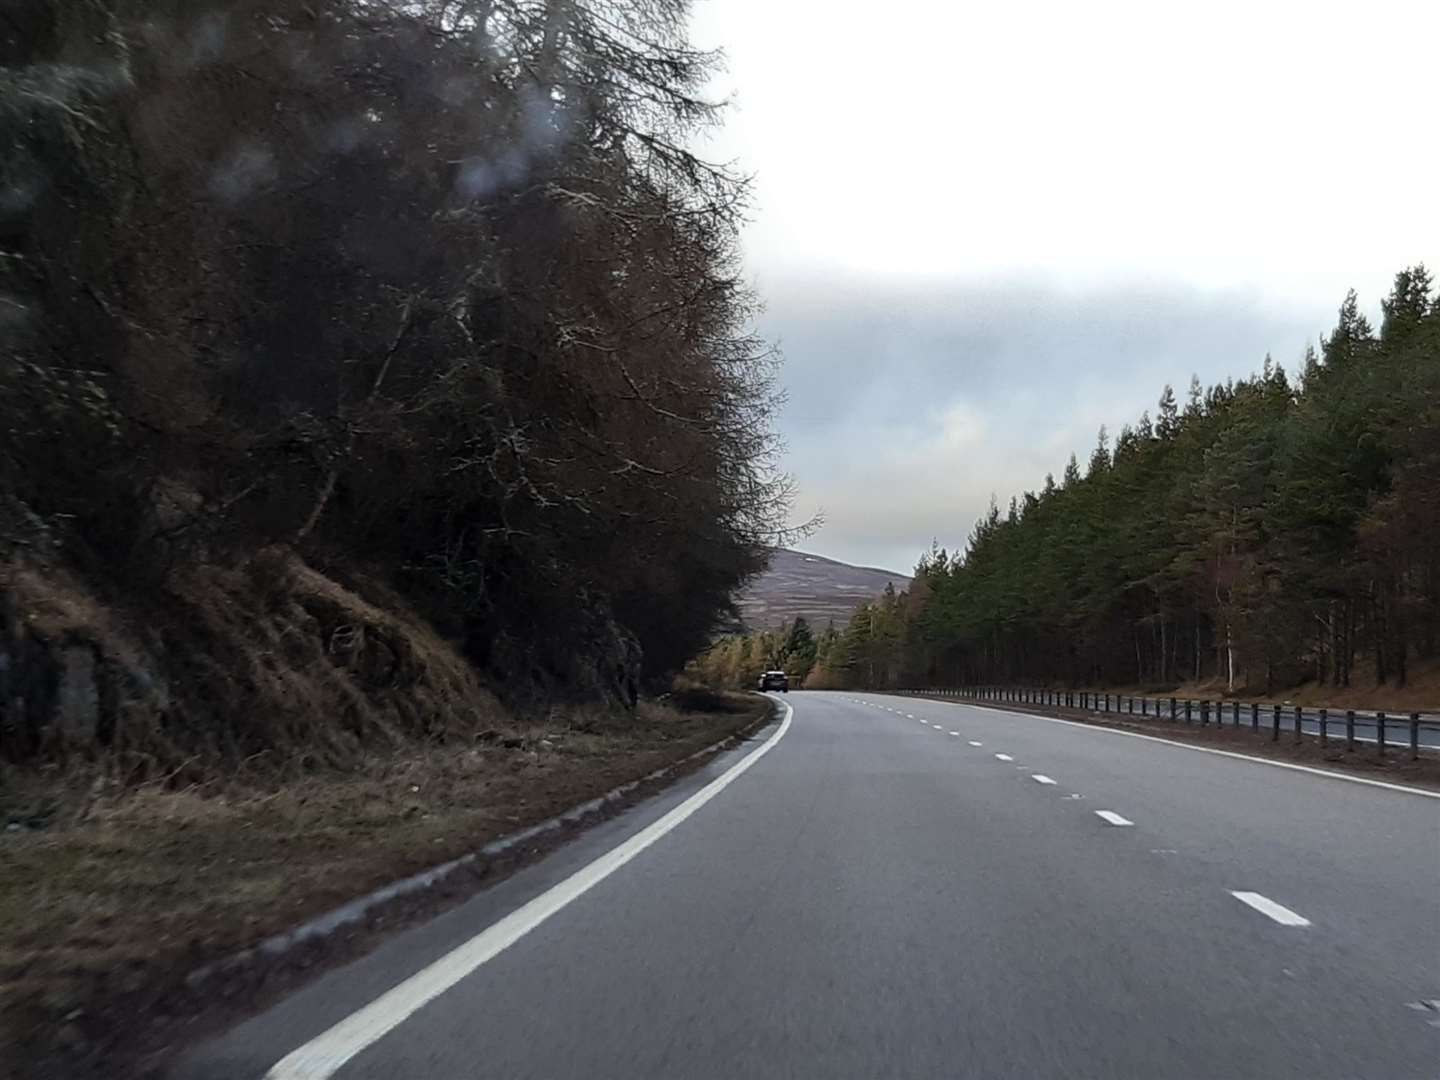 Inverness to Slochd: Trees 'too close to the road', as seen at Tomatin.